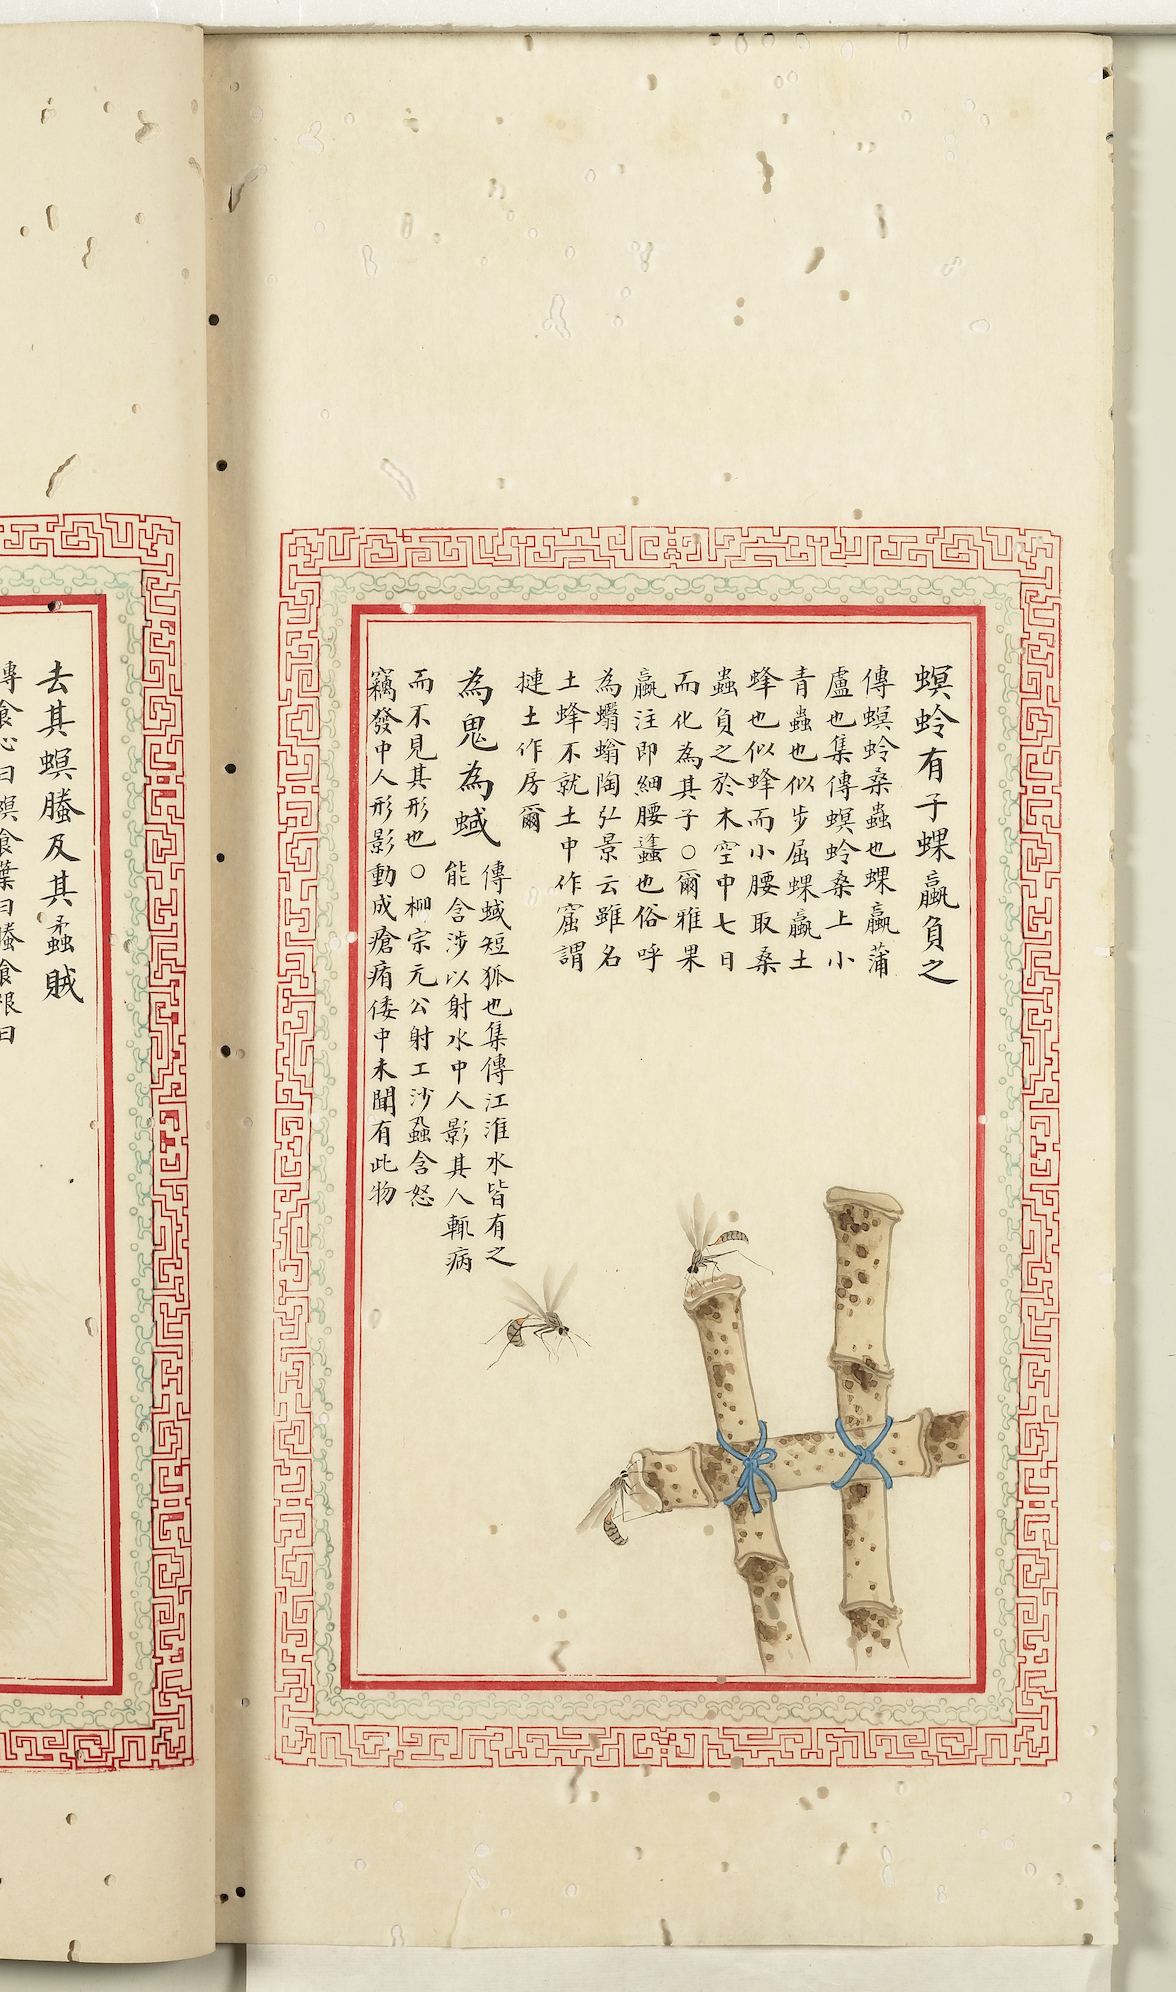 A Textual Research on the Poems and Objects of Mao's Poems in Qing Dynasty: "The borer has a son, and the scorpion bears it"